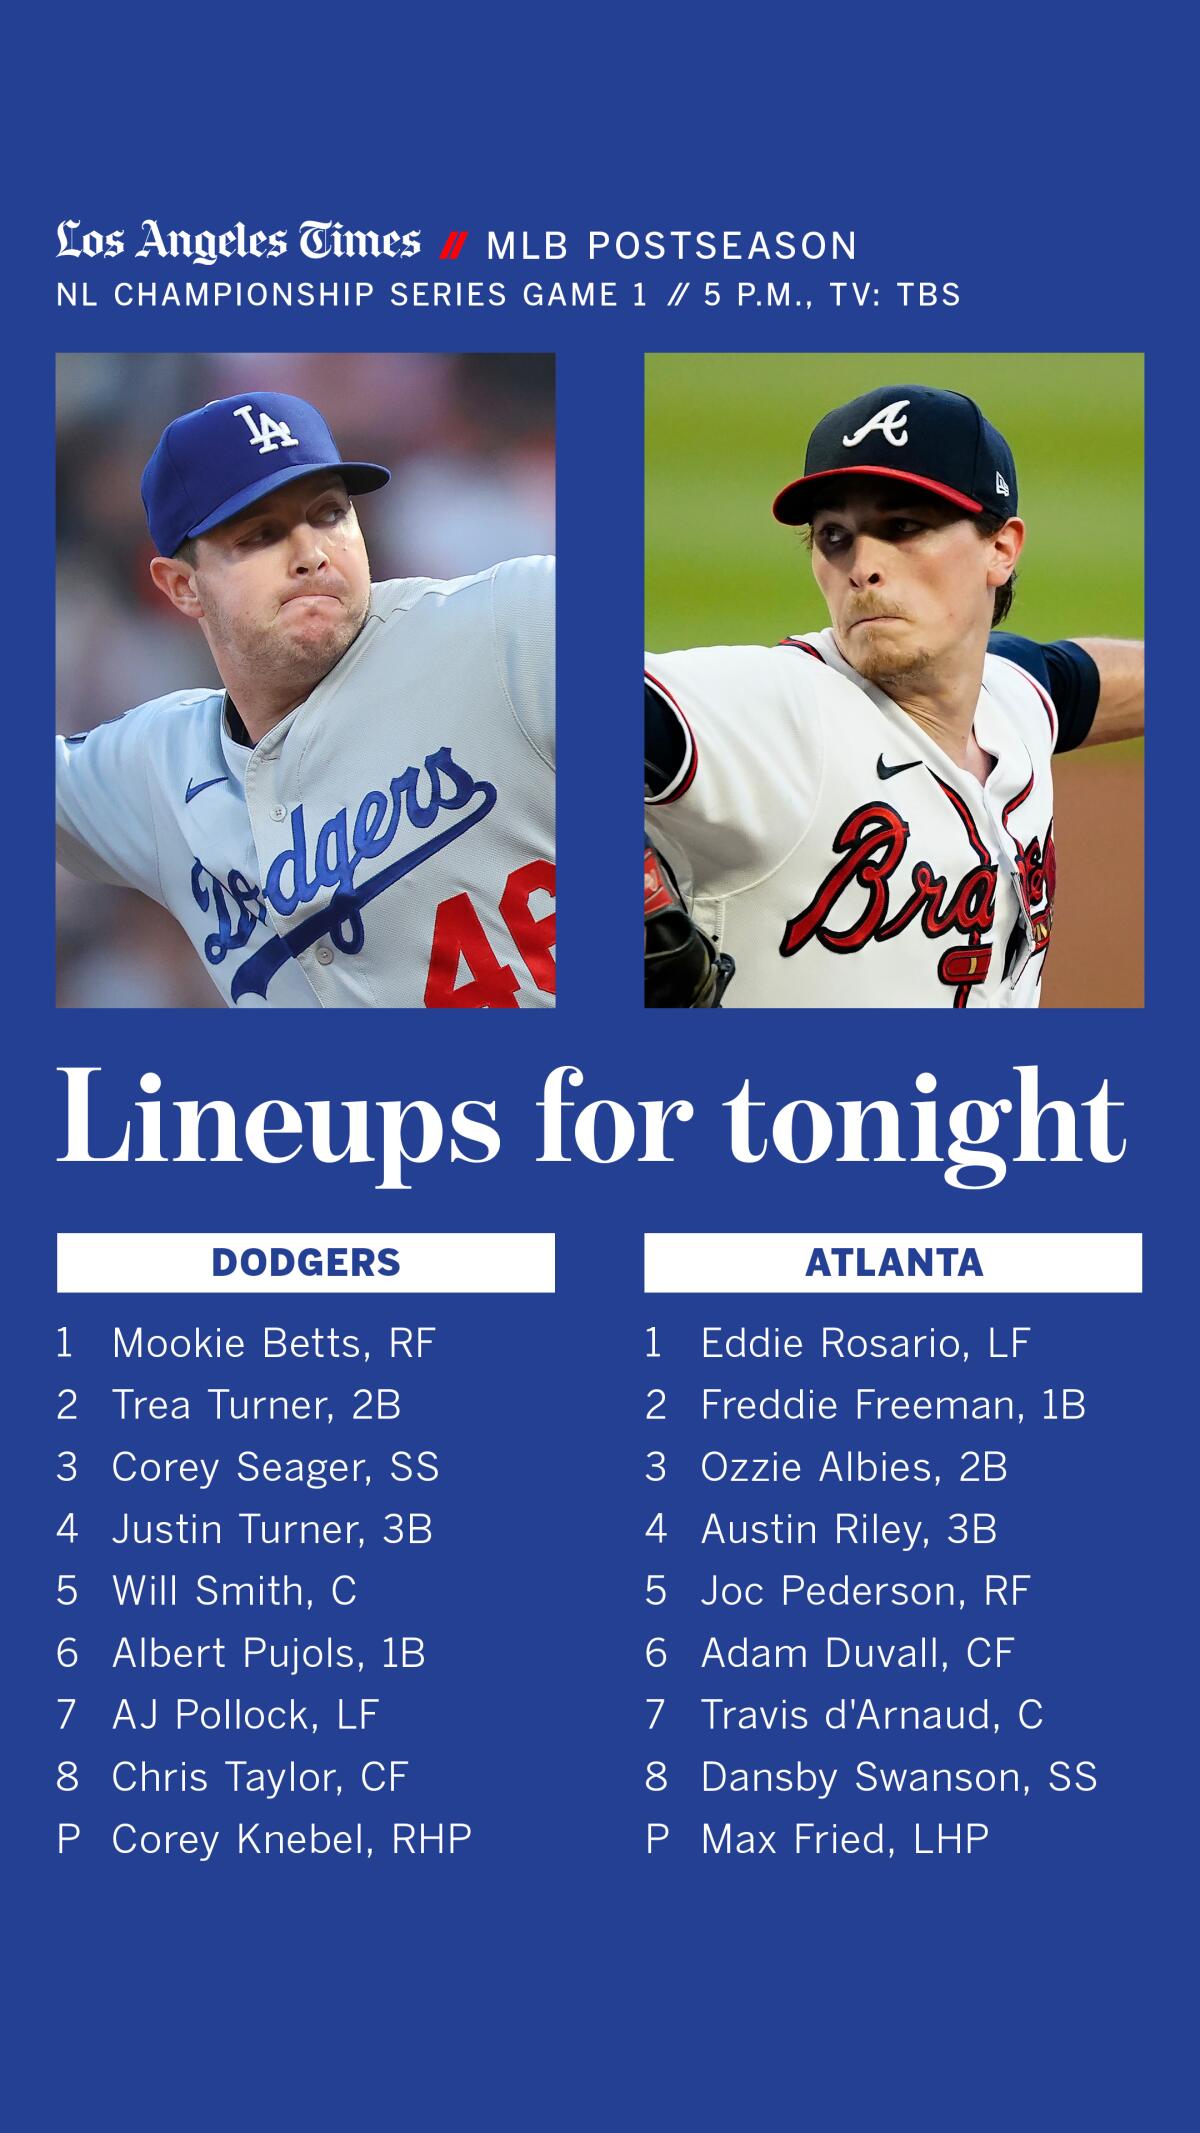 Dodgers vs. Braves in Game 1 of the 2021 NLCS lineup.